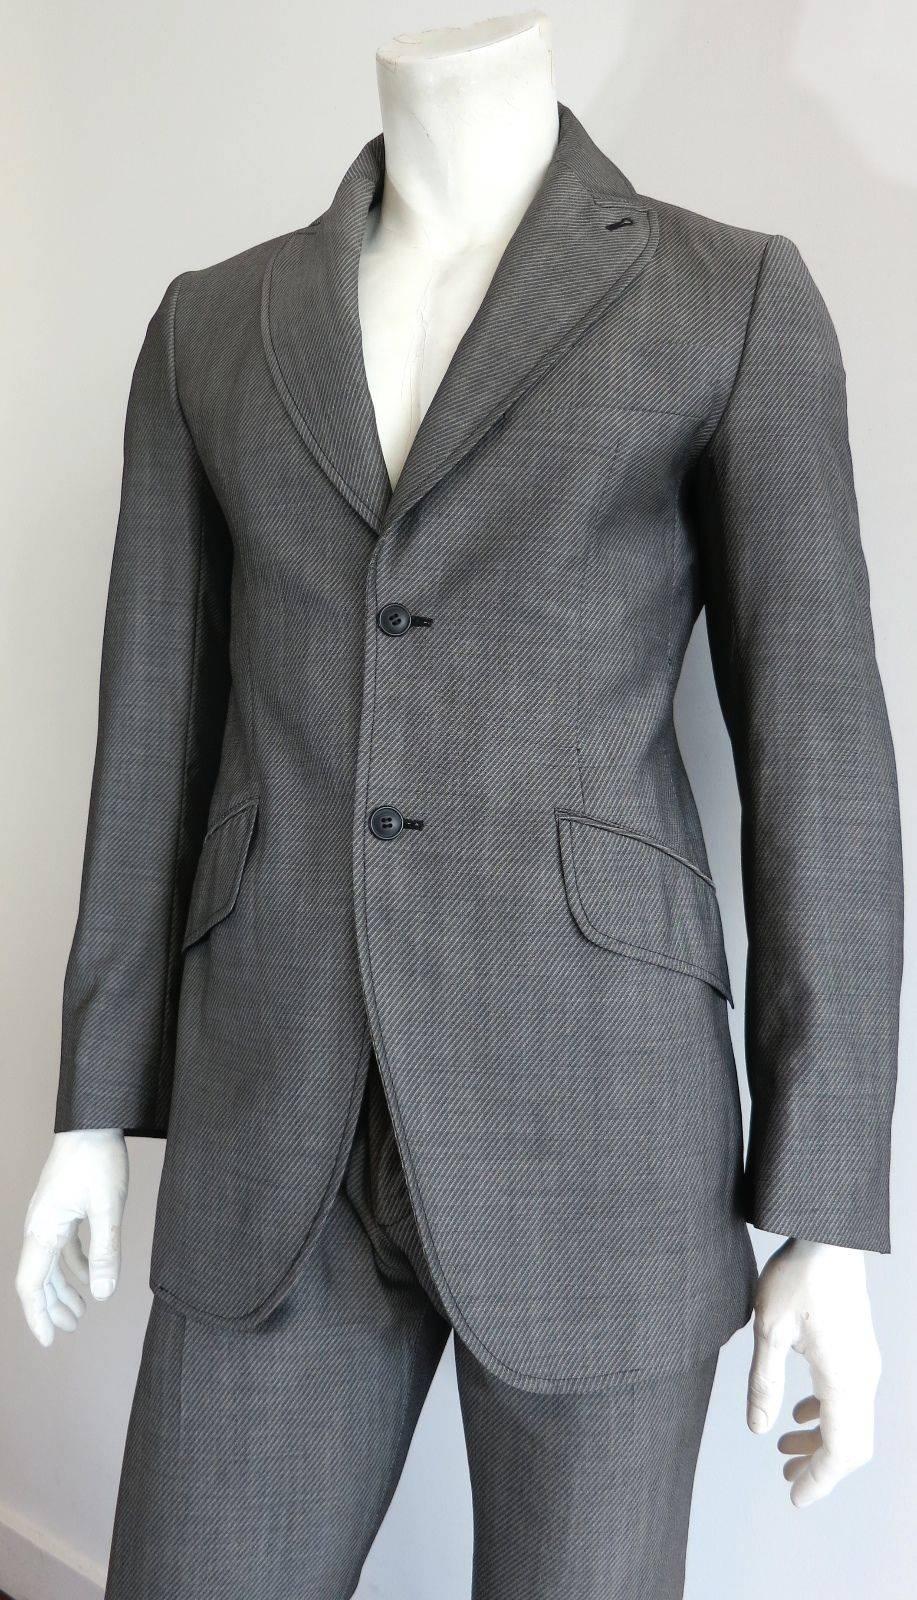 EDITOR'S NOTES:

Excellent condition VIVIENNE WESTWOOD LONDON Man gray wool & mohair, twill weave suit

Double button front closures

Signature Westwood shaped, peak lapel front with embroidered button hole

Generously sized, twin flap